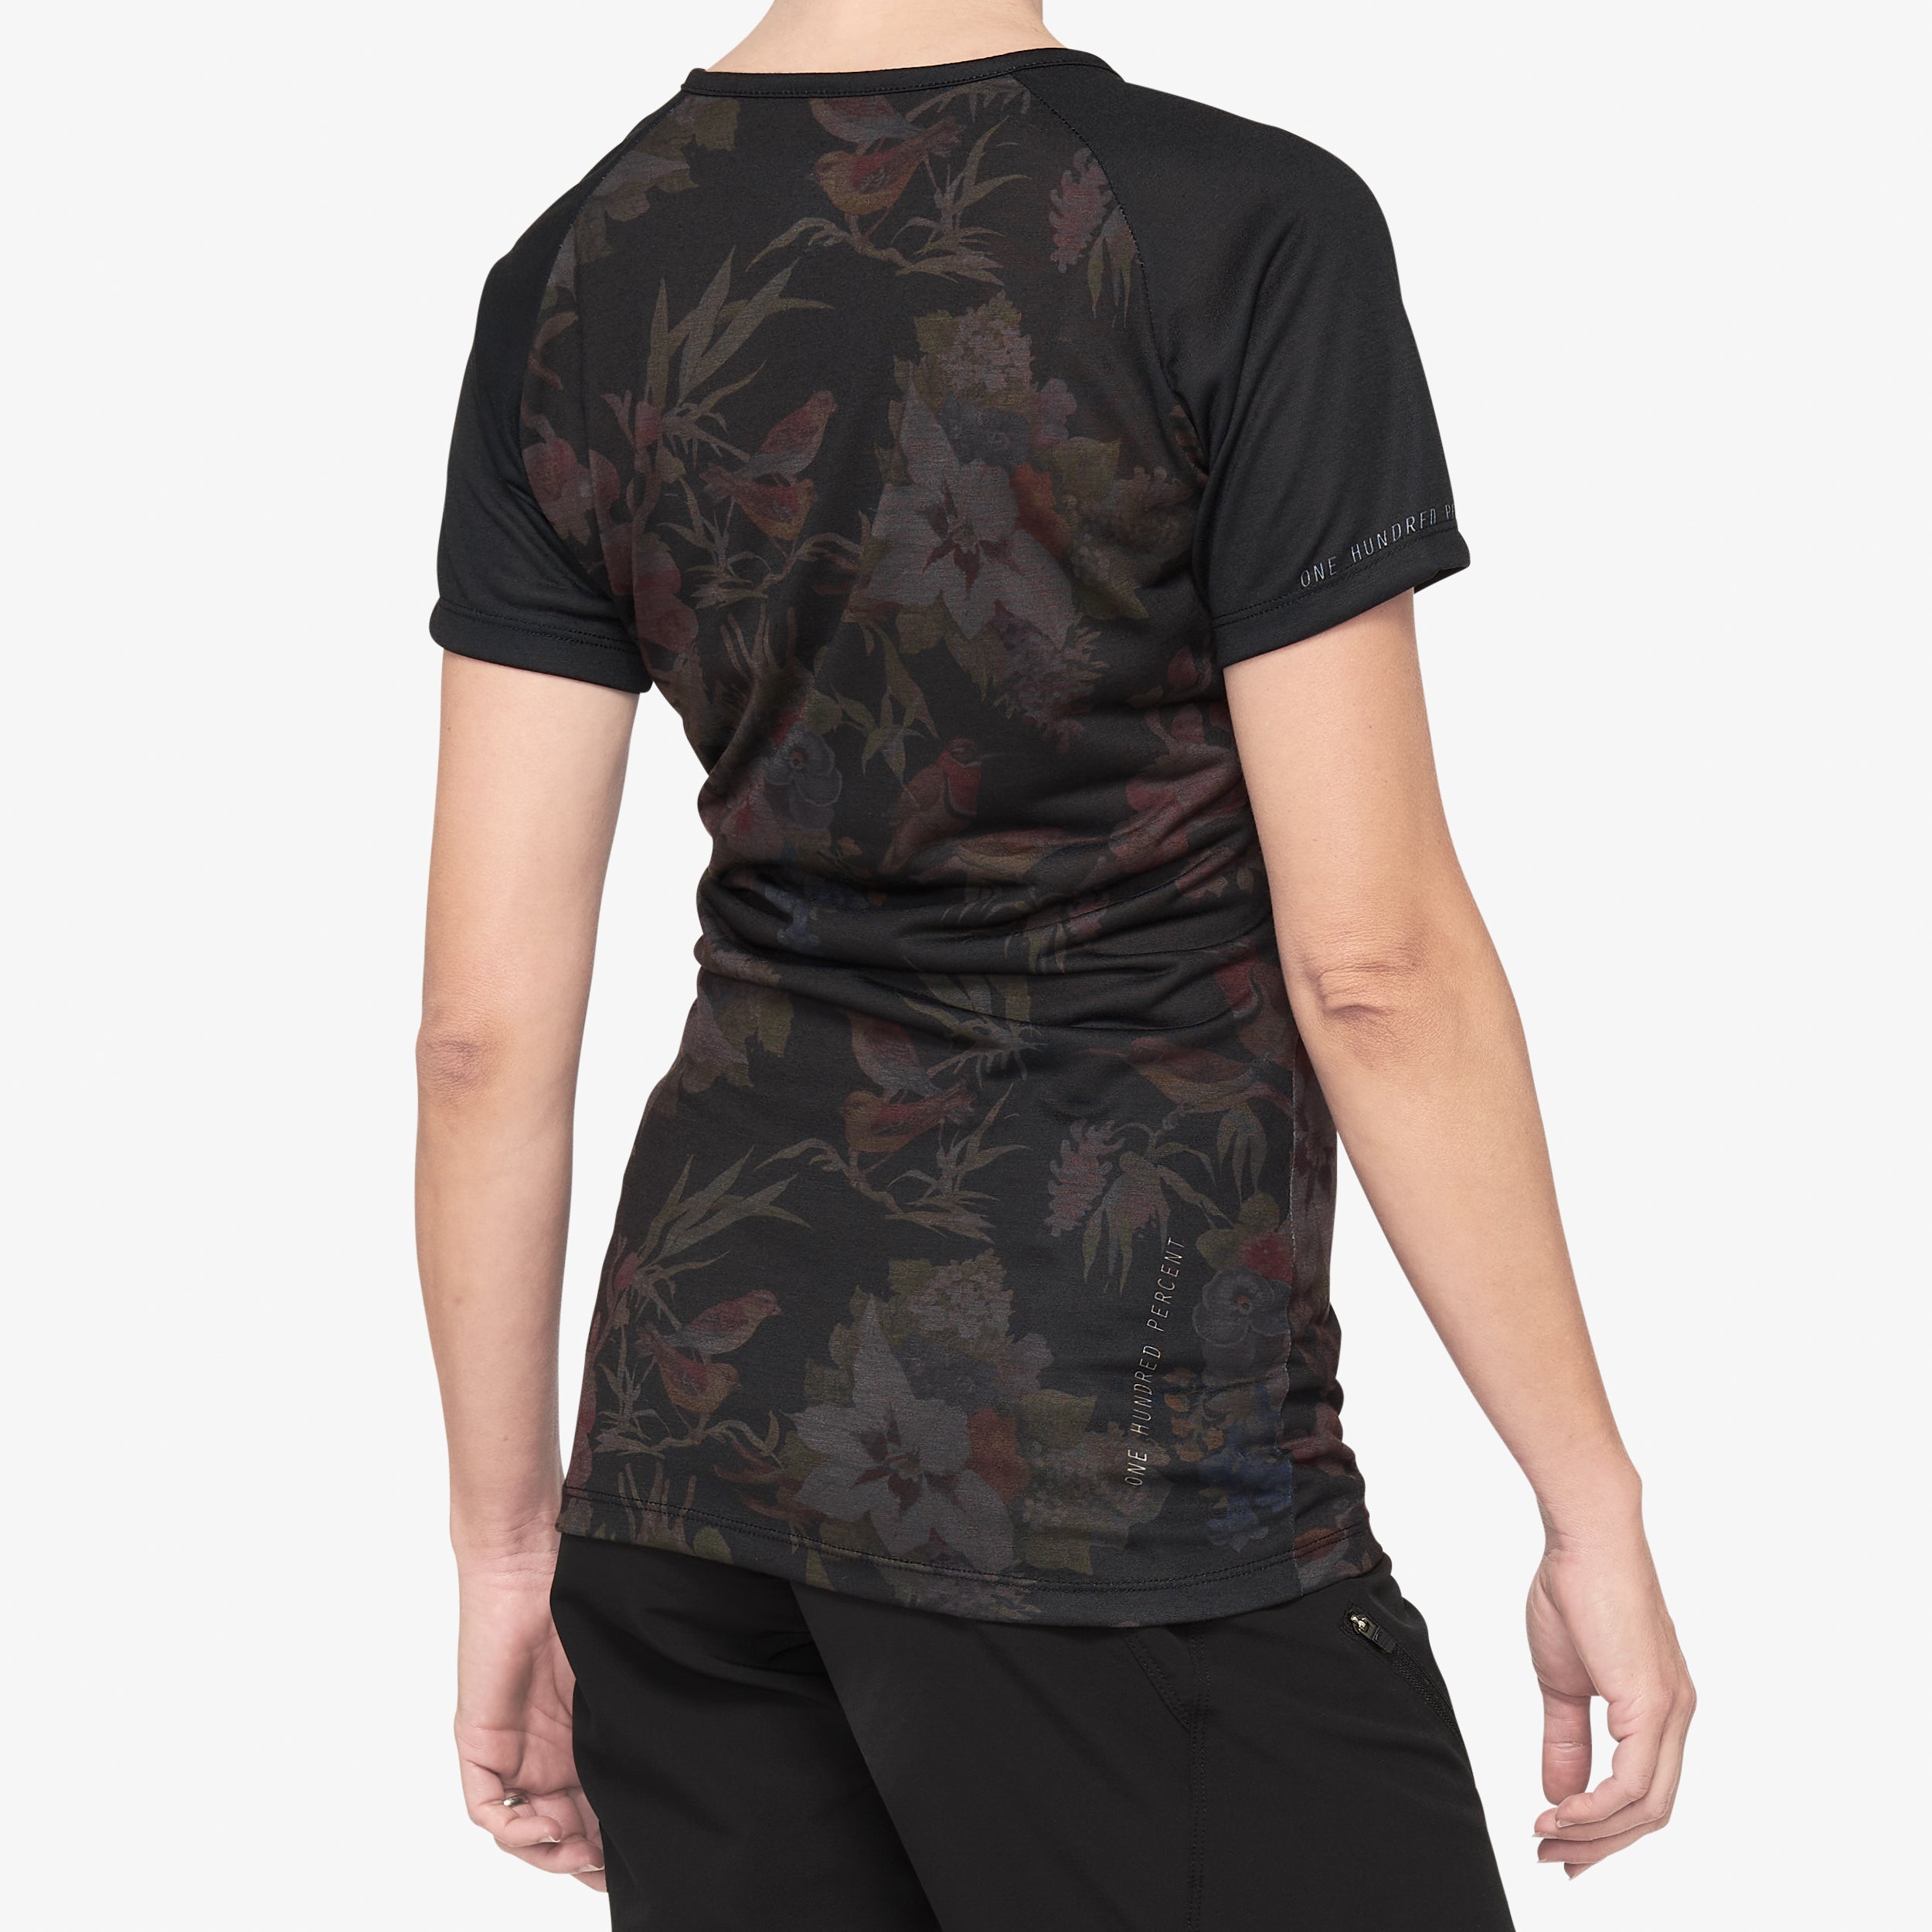 AIRMATIC Women's Jersey Black Floral - Secondary